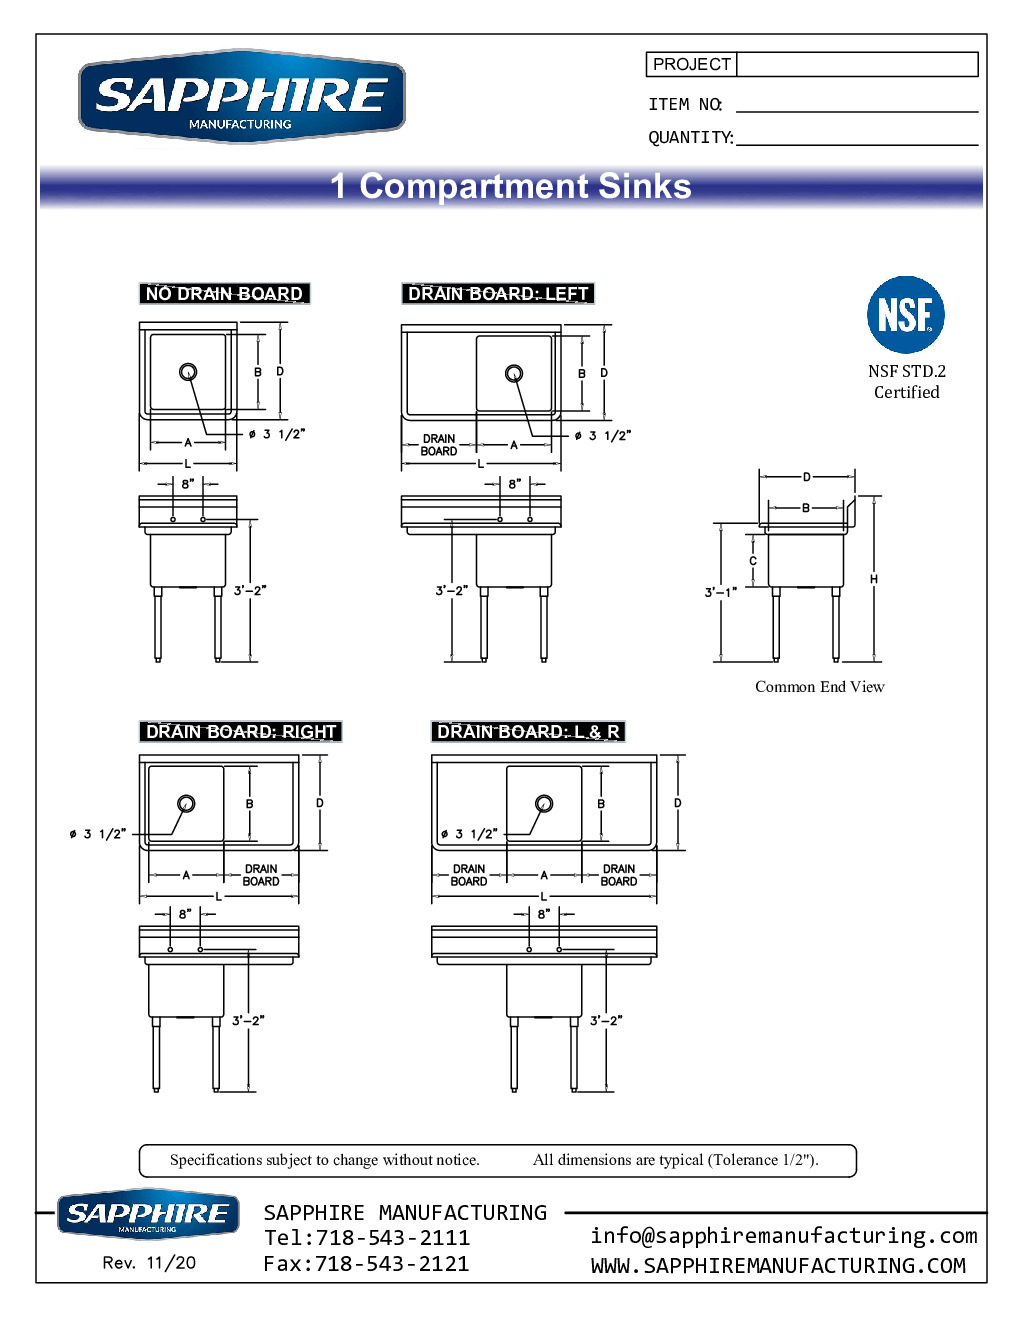 Sapphire Manufacturing SMS-1818L (1) One Compartment Sink